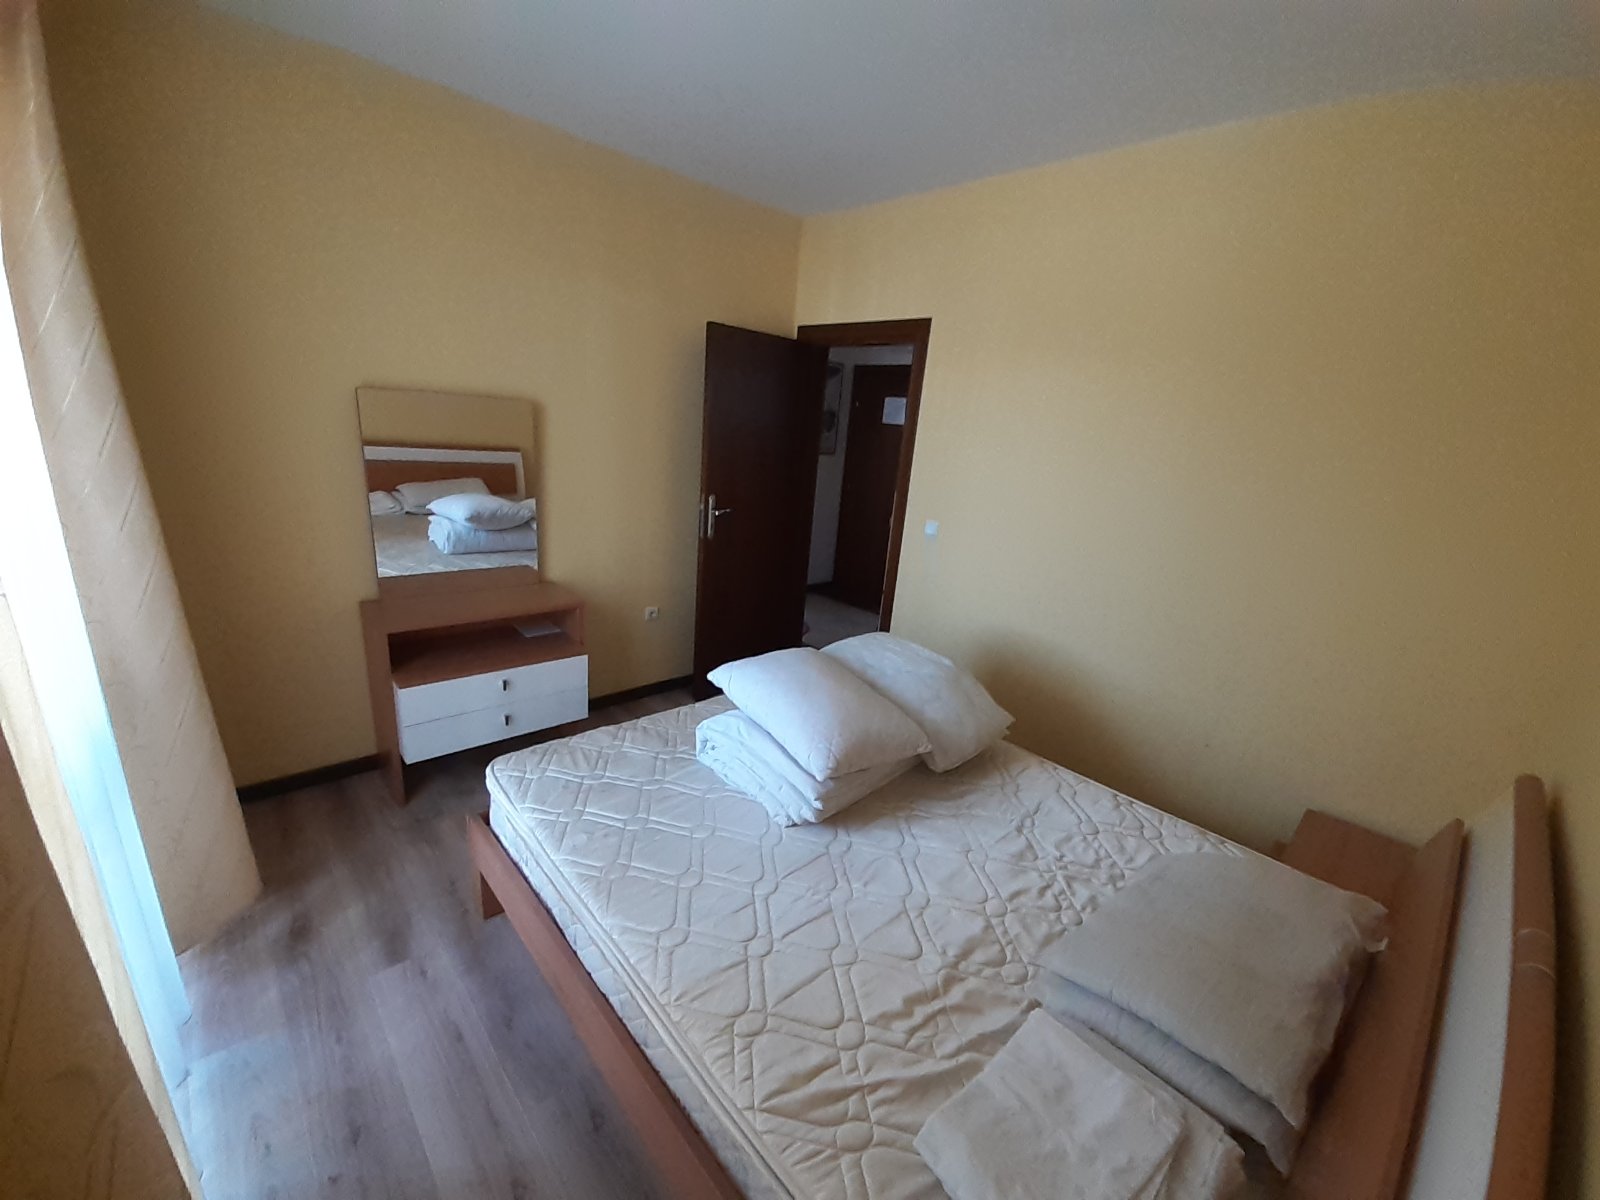 “royal bansko” complex: bright and cozy one-bedroom apartment for sale